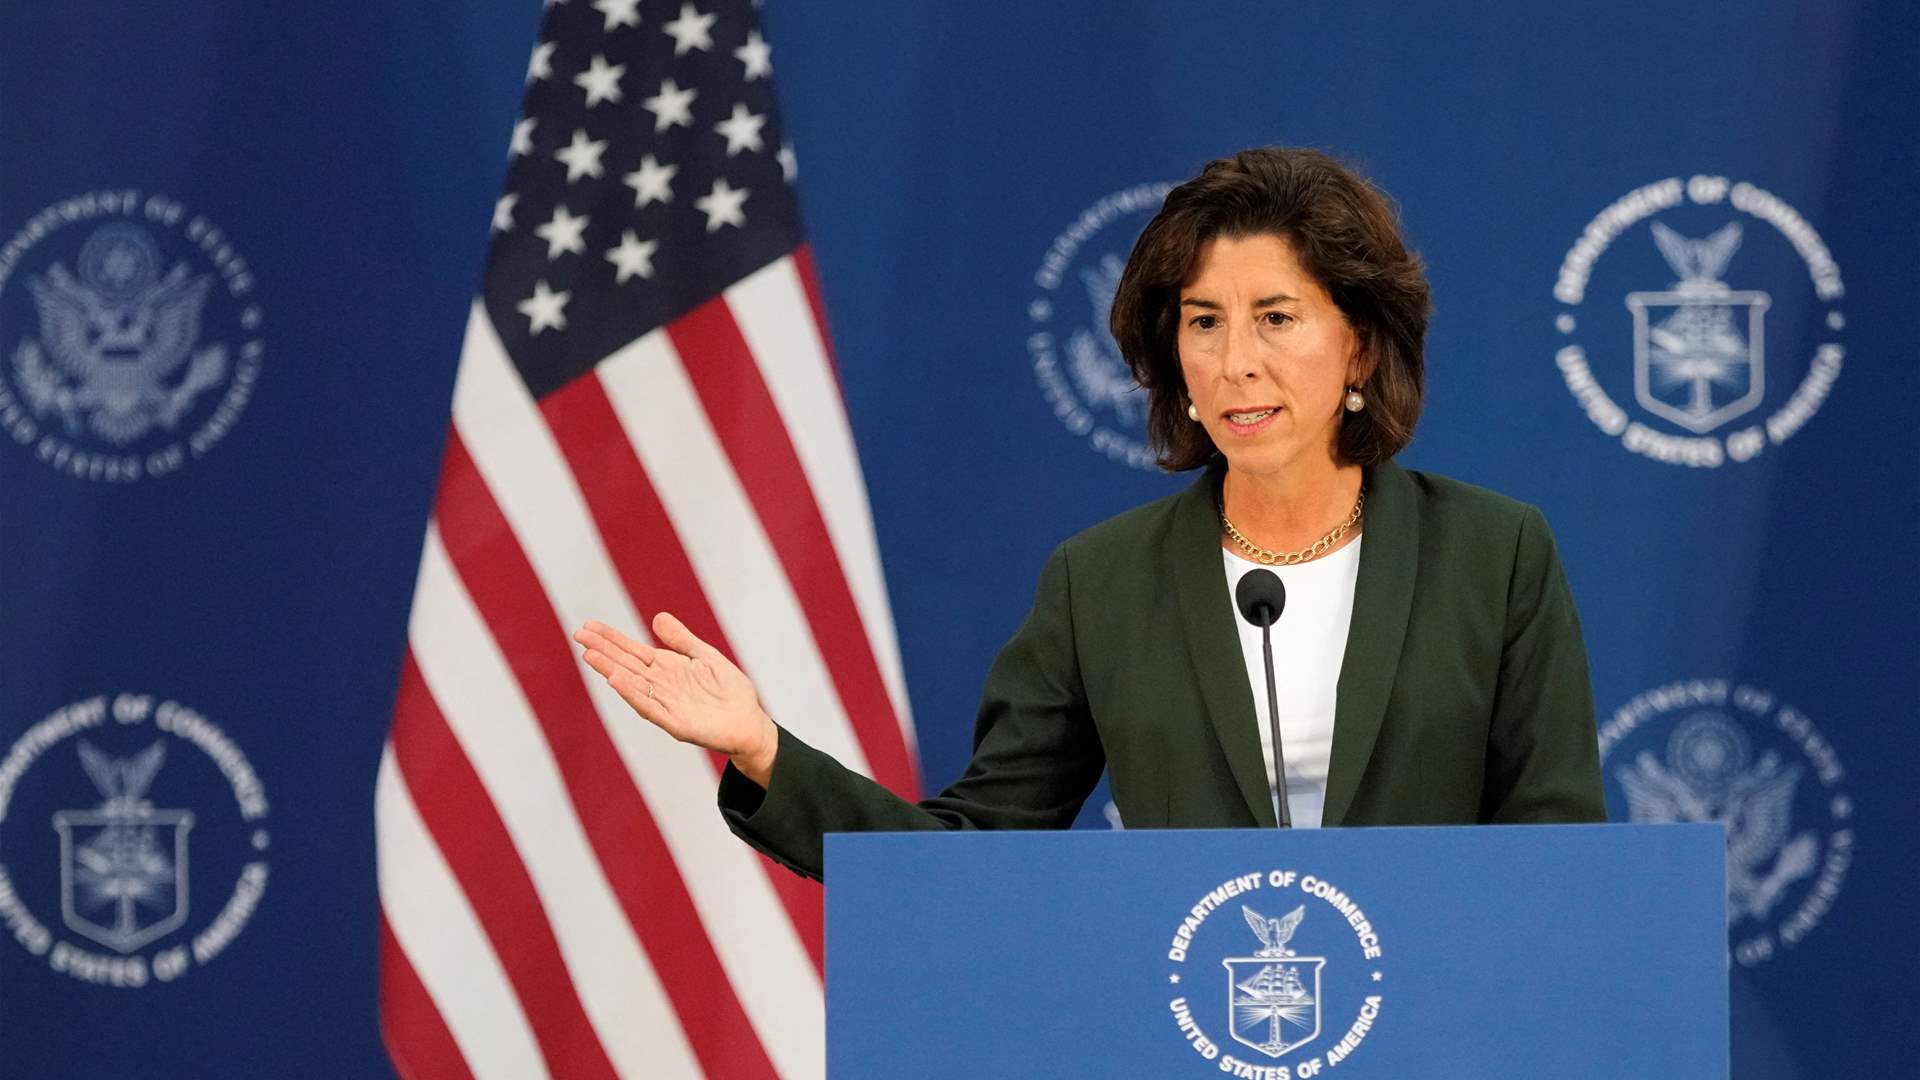 Dialogue with China is not a sign of weakness: US Secretary of Commerce